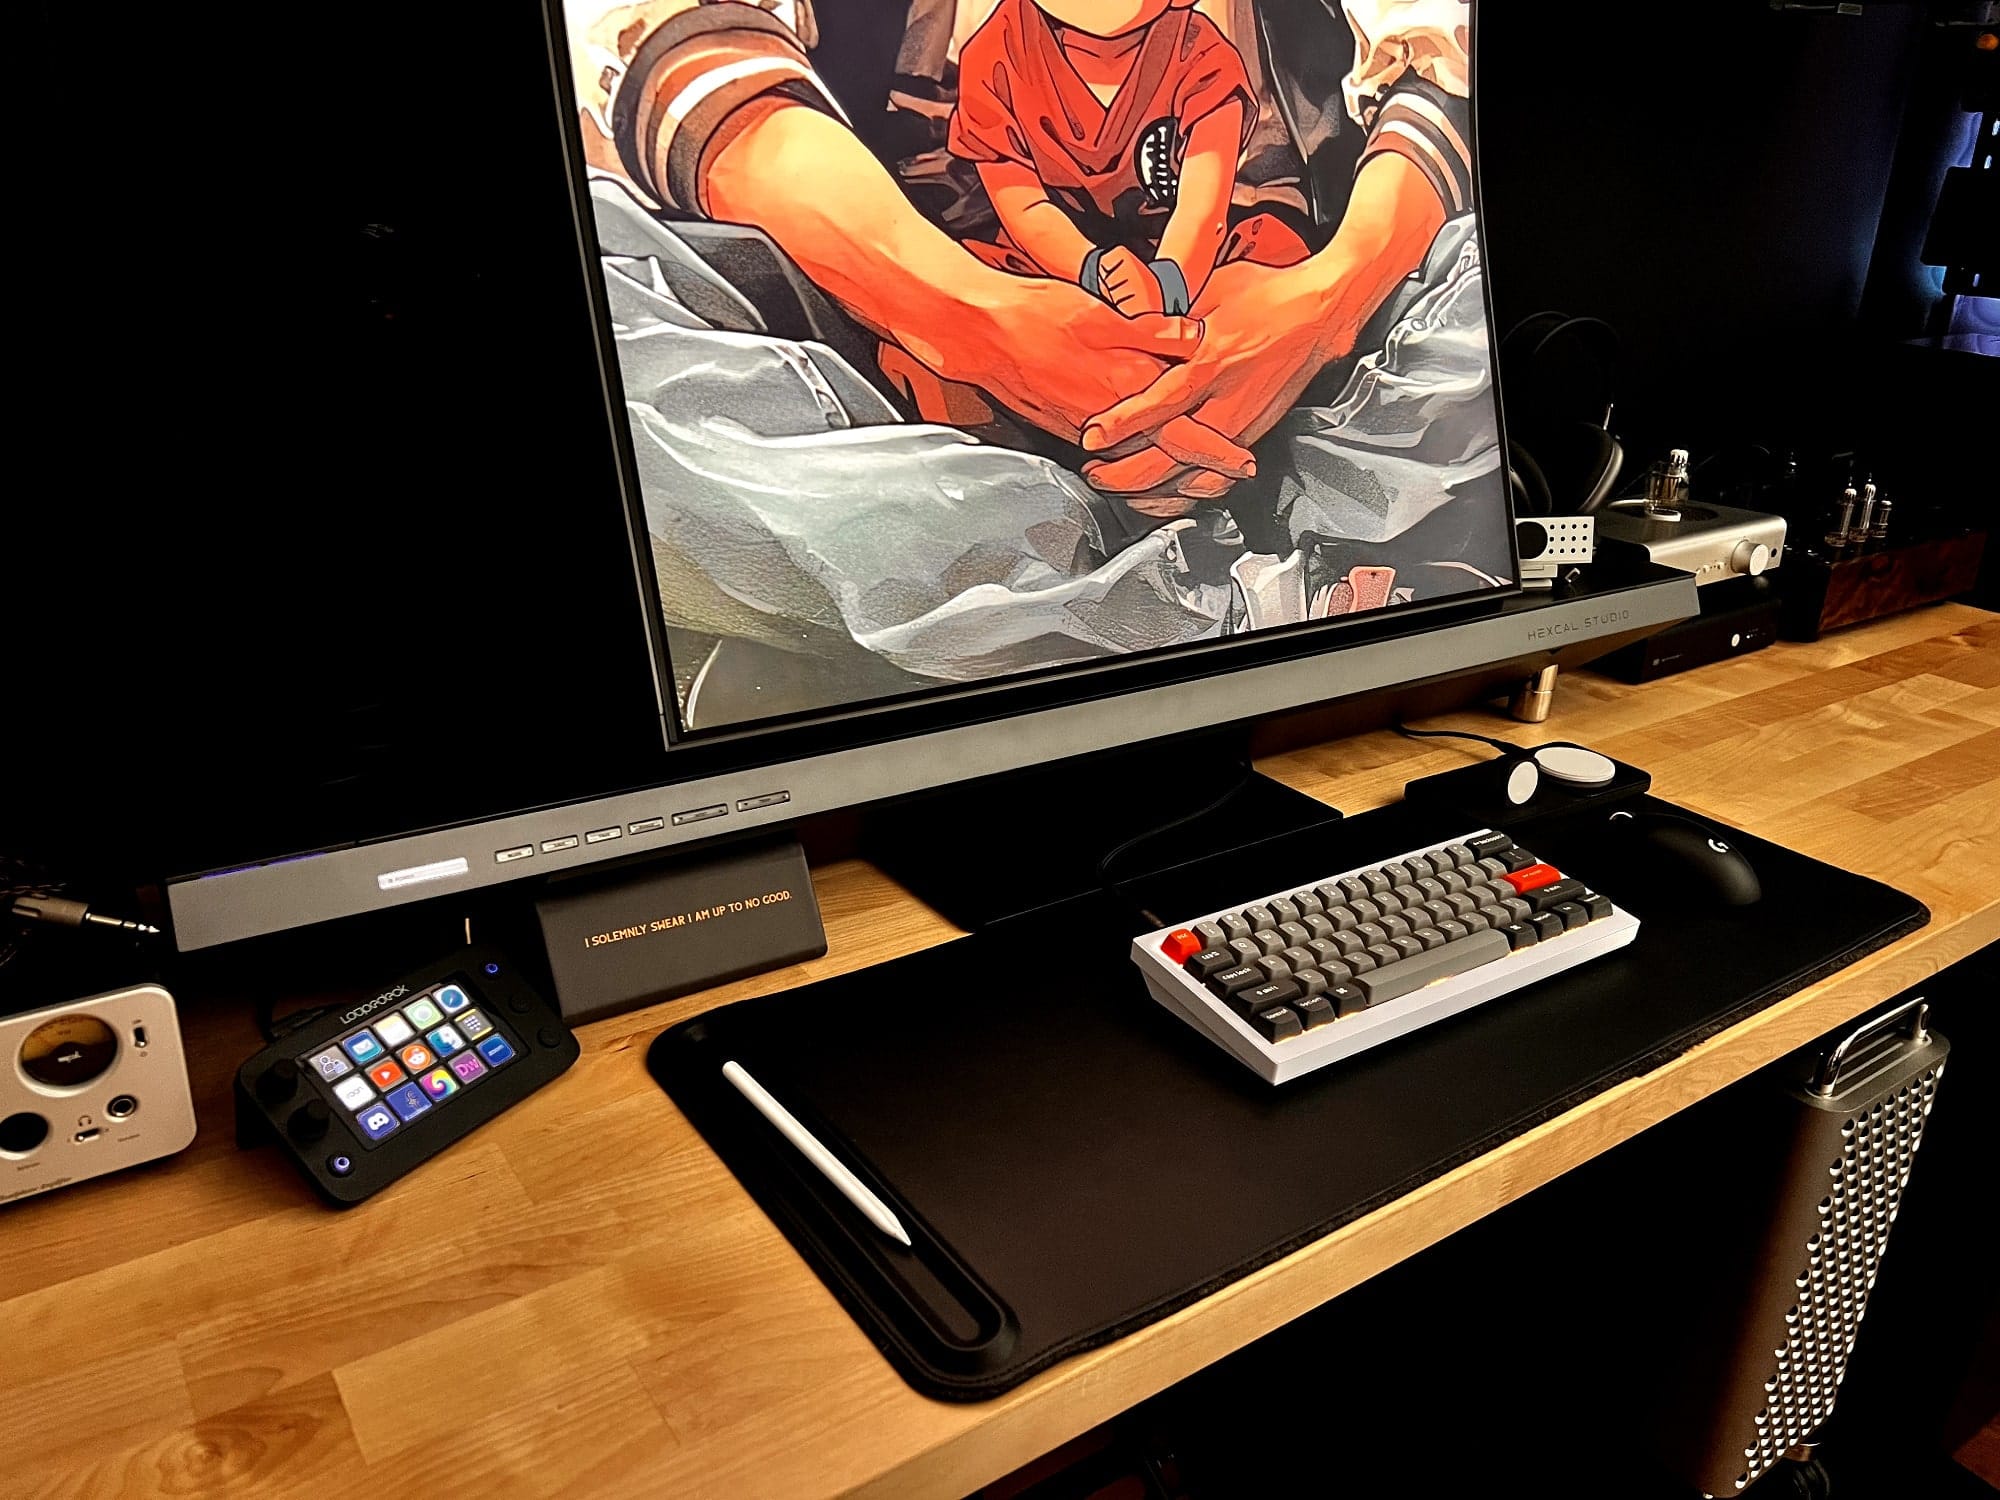 A modern desk setup featuring a large curved monitor displaying anime, a grey Keychron Q4 mechanical keyboard with custom keycaps, a Logitech G Pro wireless gaming mouse, a Stream Deck, and an Apple Pencil on a black desk mat, with high-end audio equipment and a Mac Pro tower placed underneath the desk